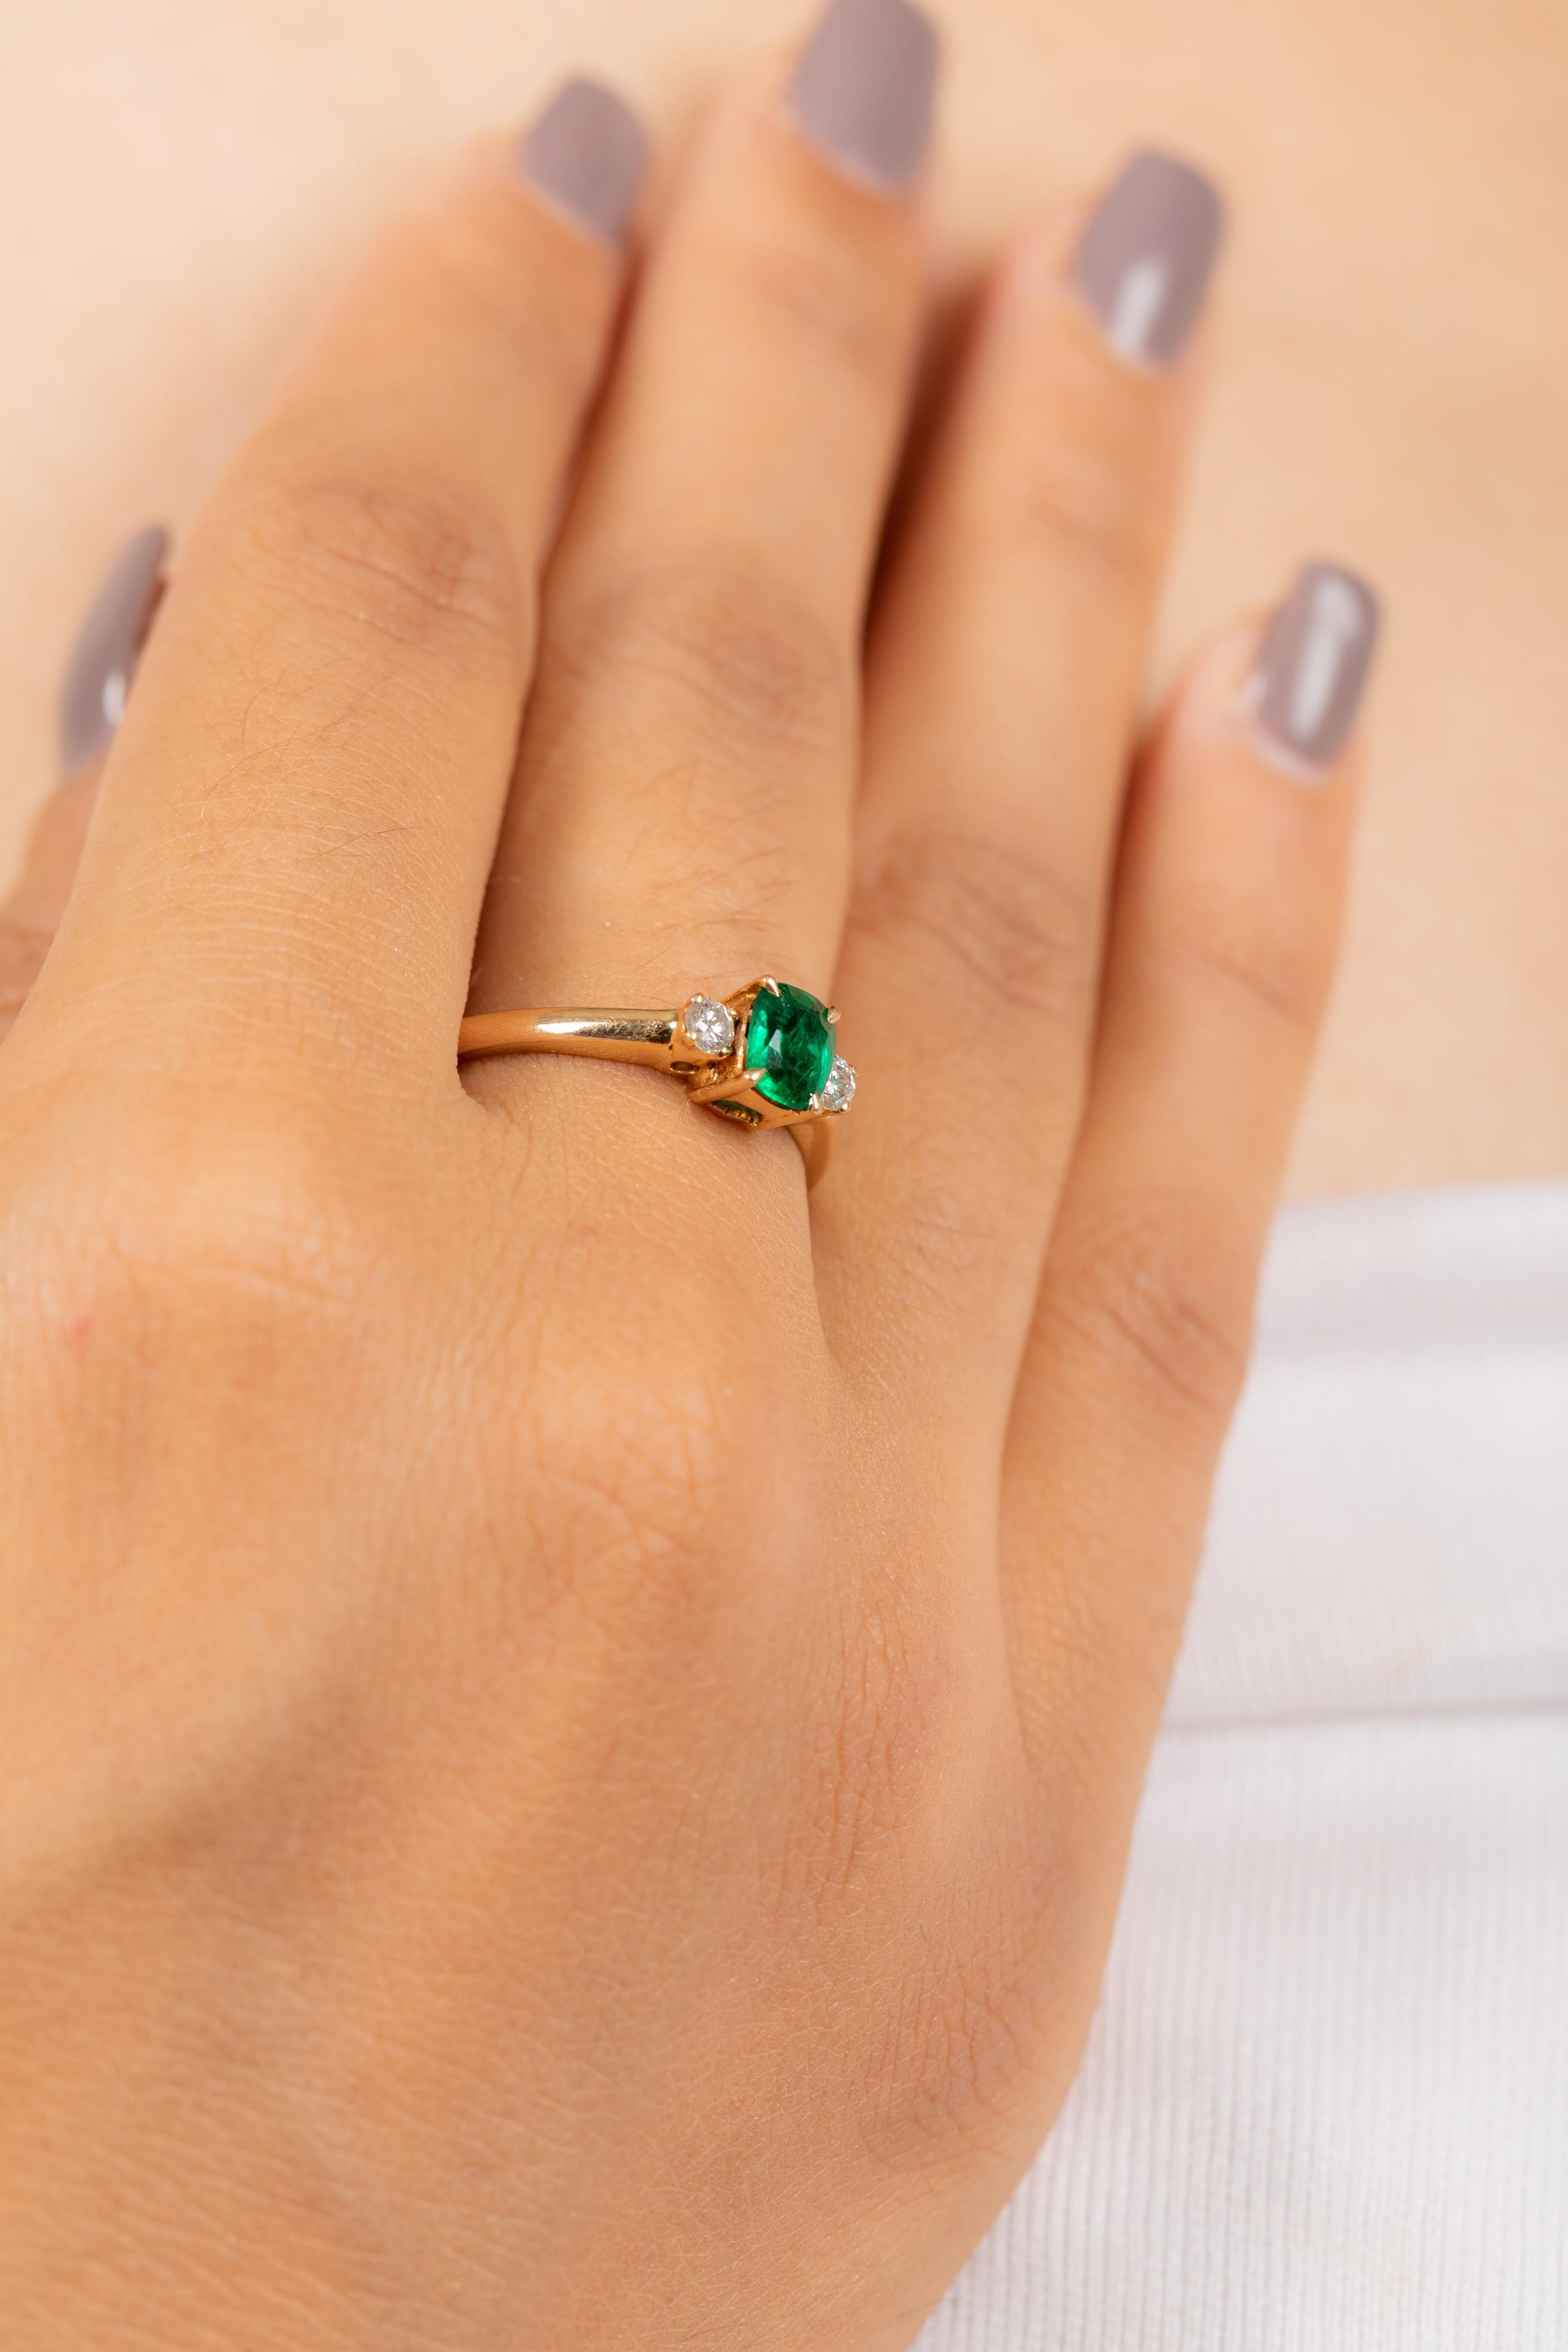 For Sale:  Emerald Gemstone Ring in 18k Solid Yellow Gold with Diamonds 7